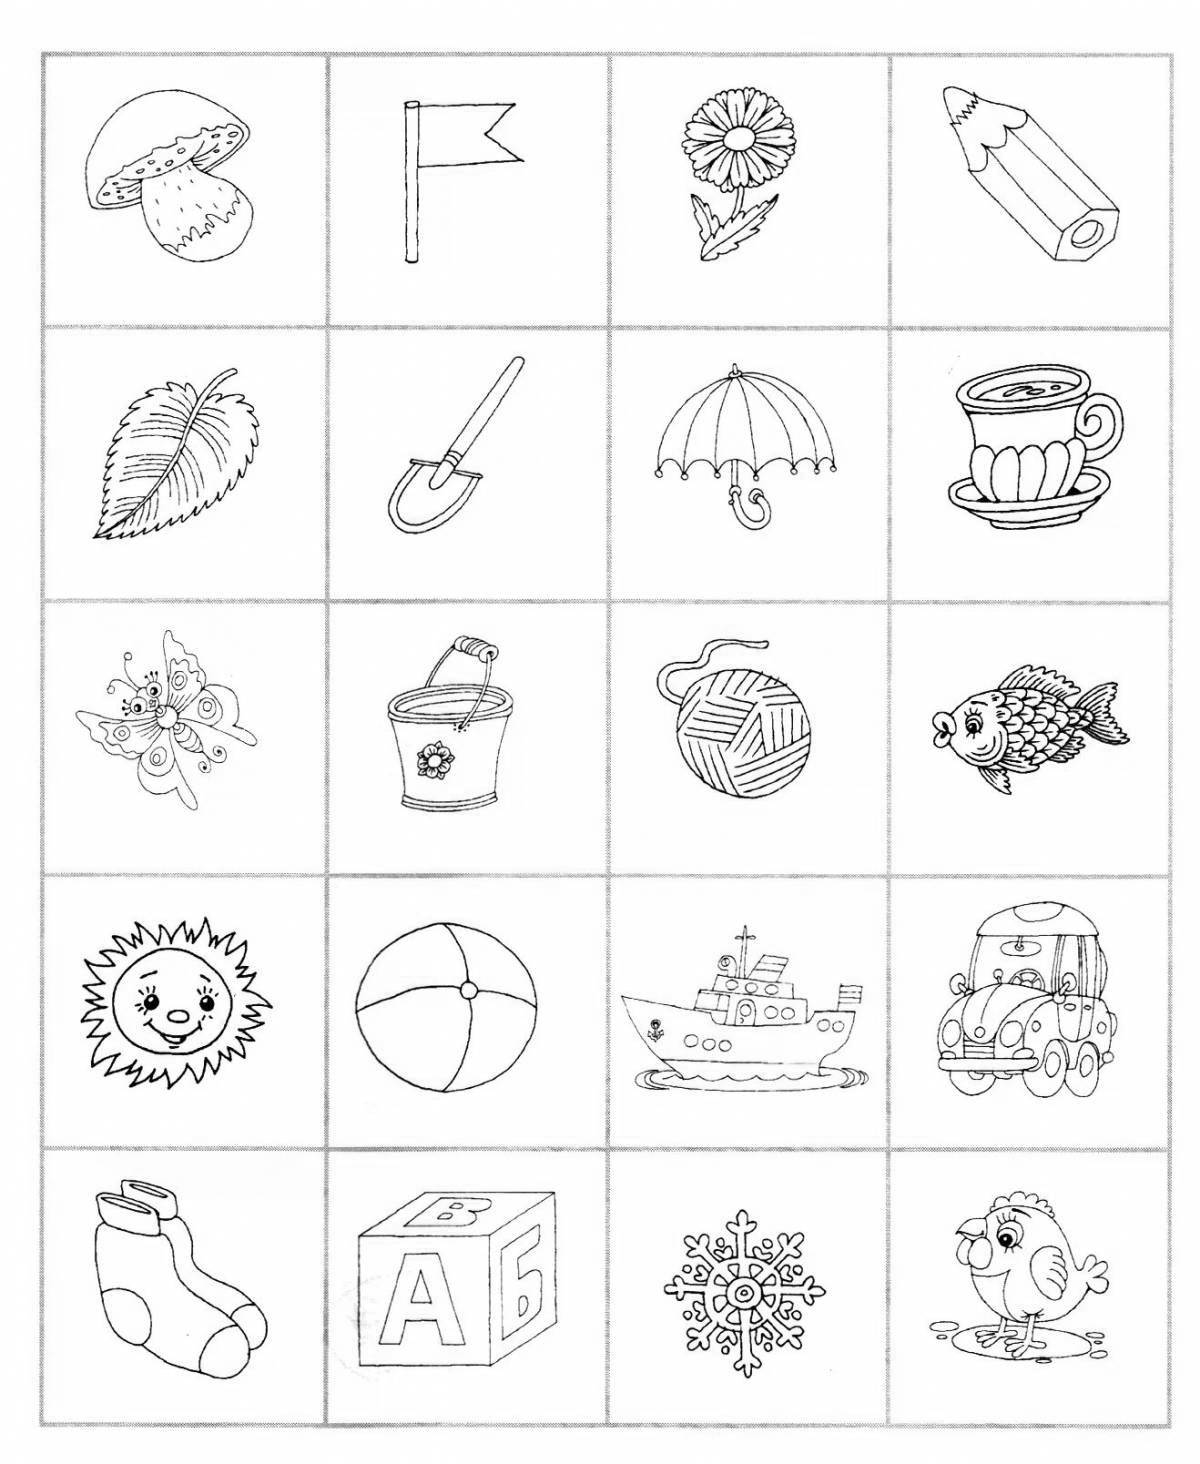 Colourful coloring pages for little adventurers